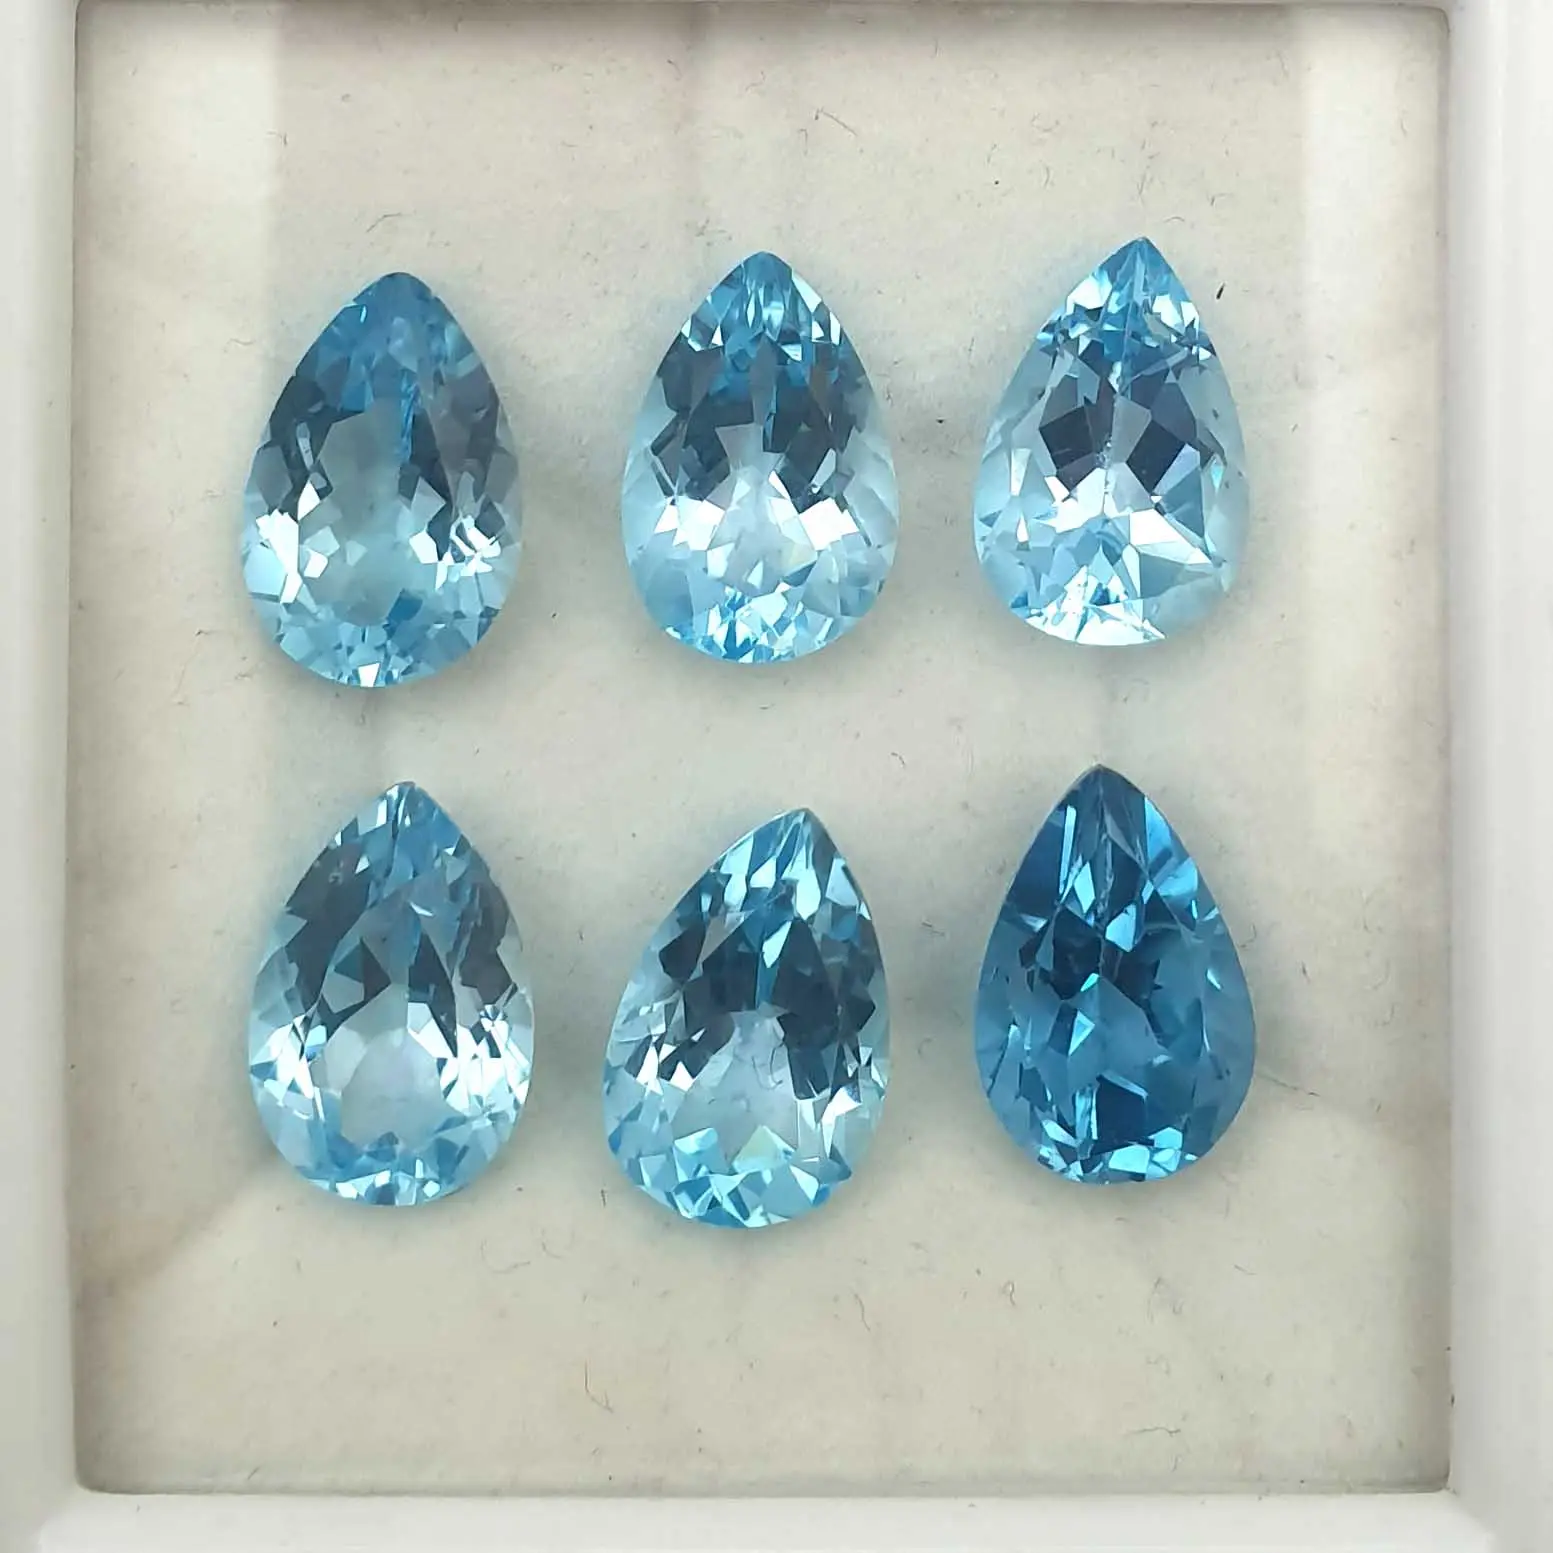 Blue Topaz Mix Pear Cut Gemstone Lot ,Natural Sky Blue Topaz For Jewelry Making, Topaz Faceted Loose Gemstone 2.5x5 TO 15x20 mm